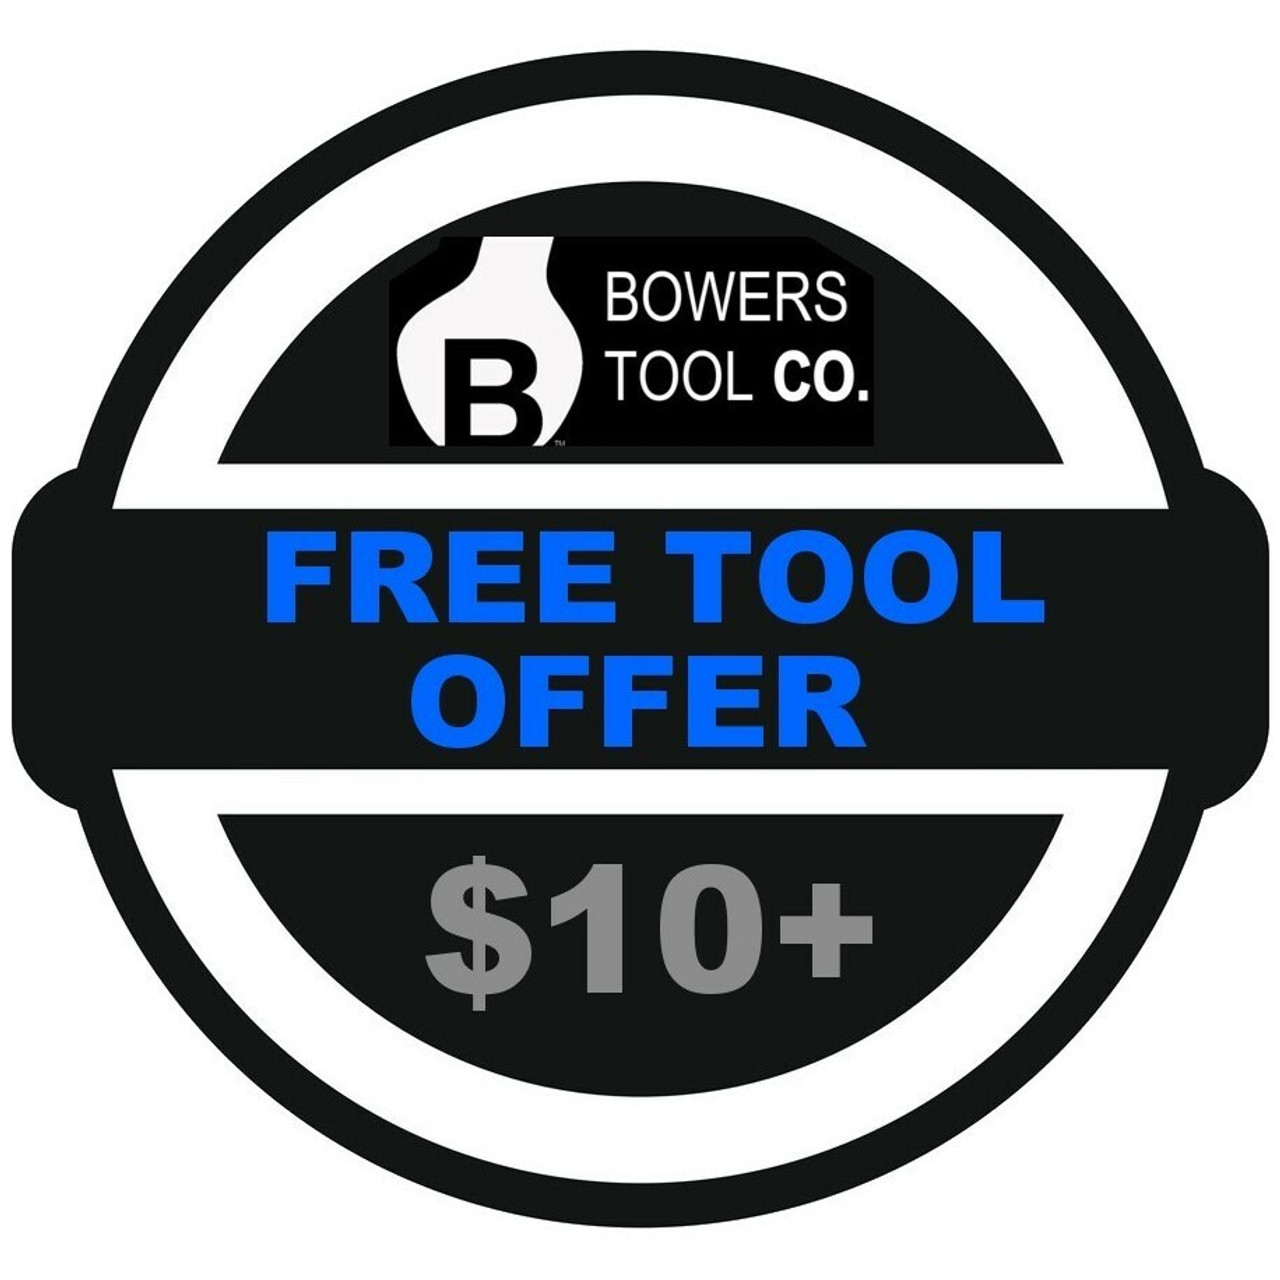 $10+ FREE TOOL OFFERS